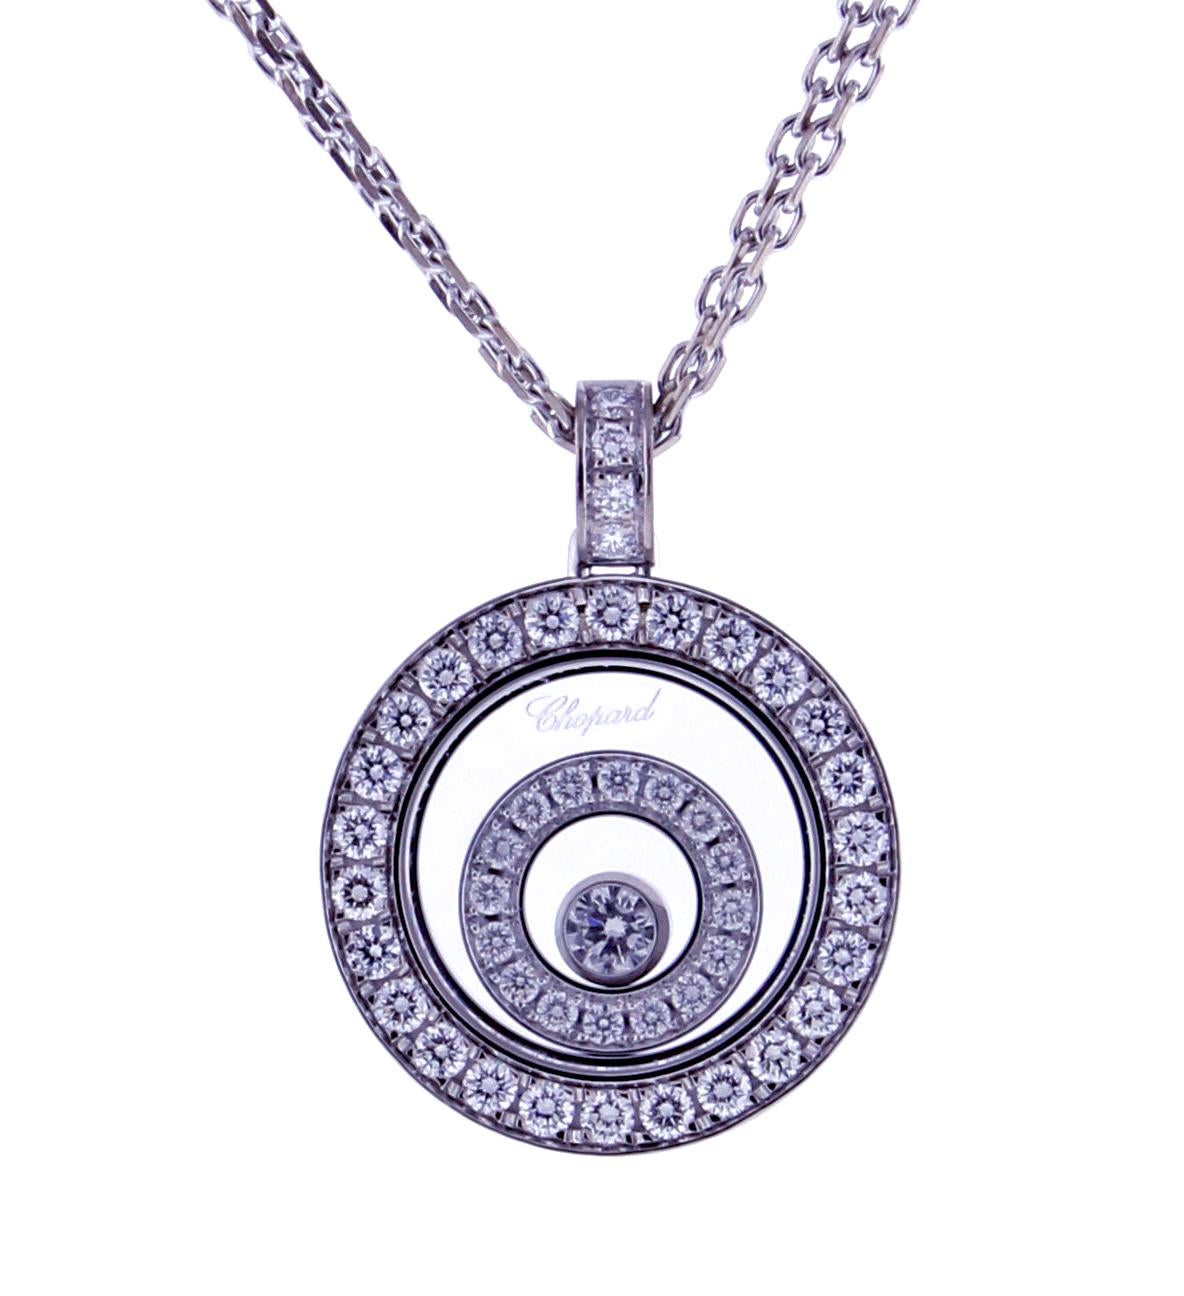 Chopard's Happy Spirit collection showcases this luminous circle pendant. Fashioned in 18 karat white gold, this pendant features two diamond circles that rest one inside the other while orbiting one floating diamond.  The 46 diamonds weigh .62